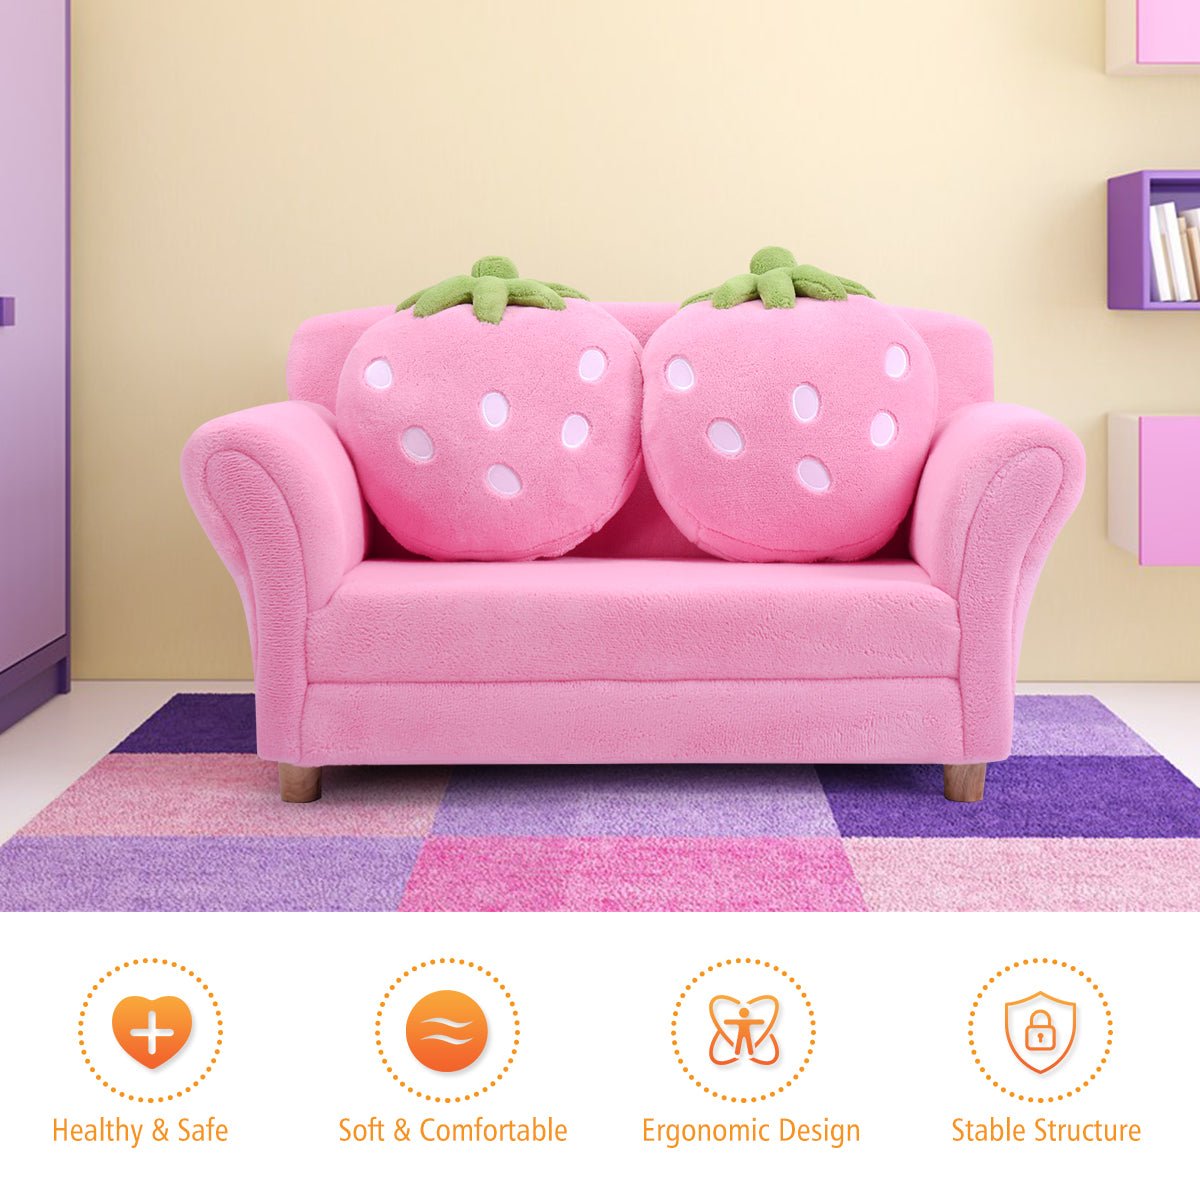 Children's 2-Seat Sofa: Lounge Bed with Cute Strawberry Pillows for Kids